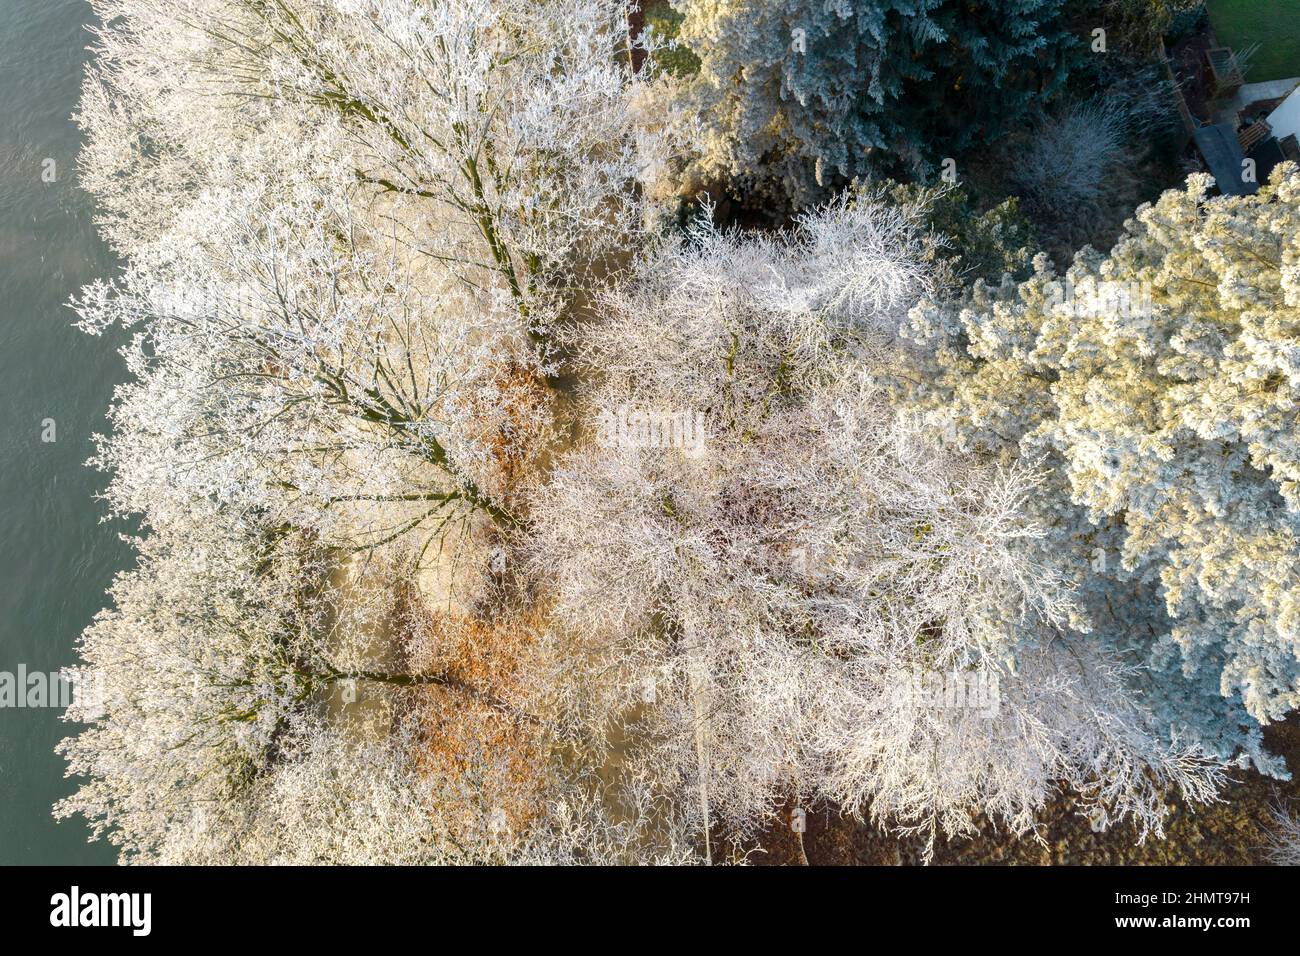 rime ice, Supercooled water droplets freeze on contact on area trees and street signs. Stock Photo